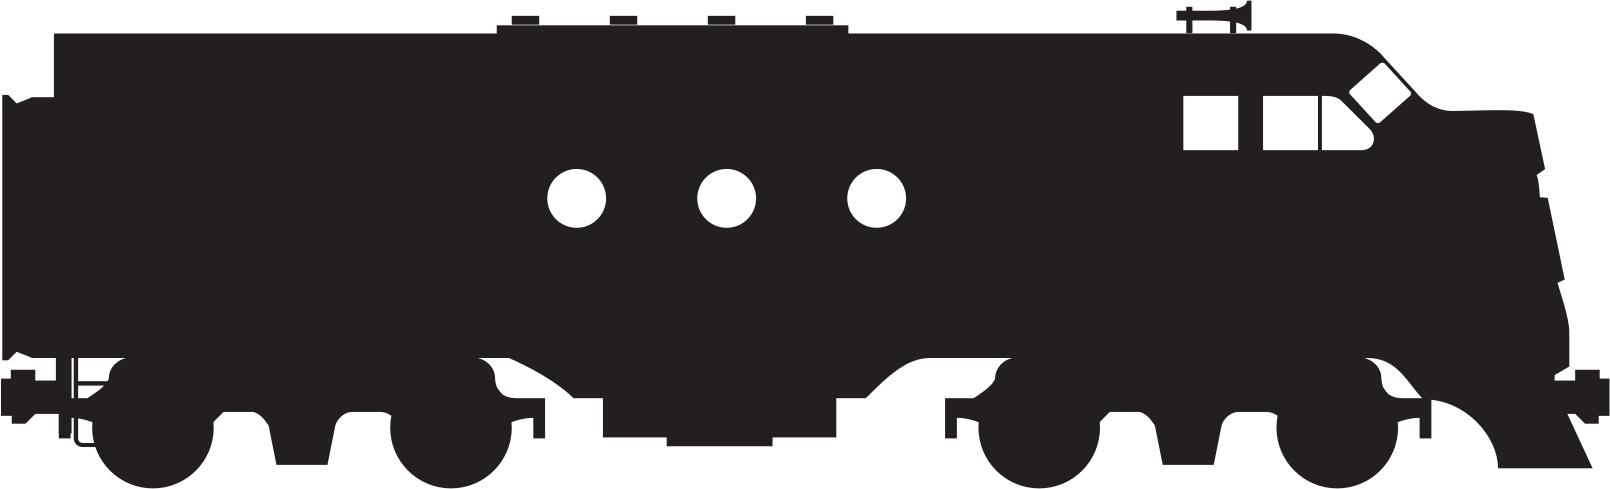 F7A Diesel Locomotive PNG icons